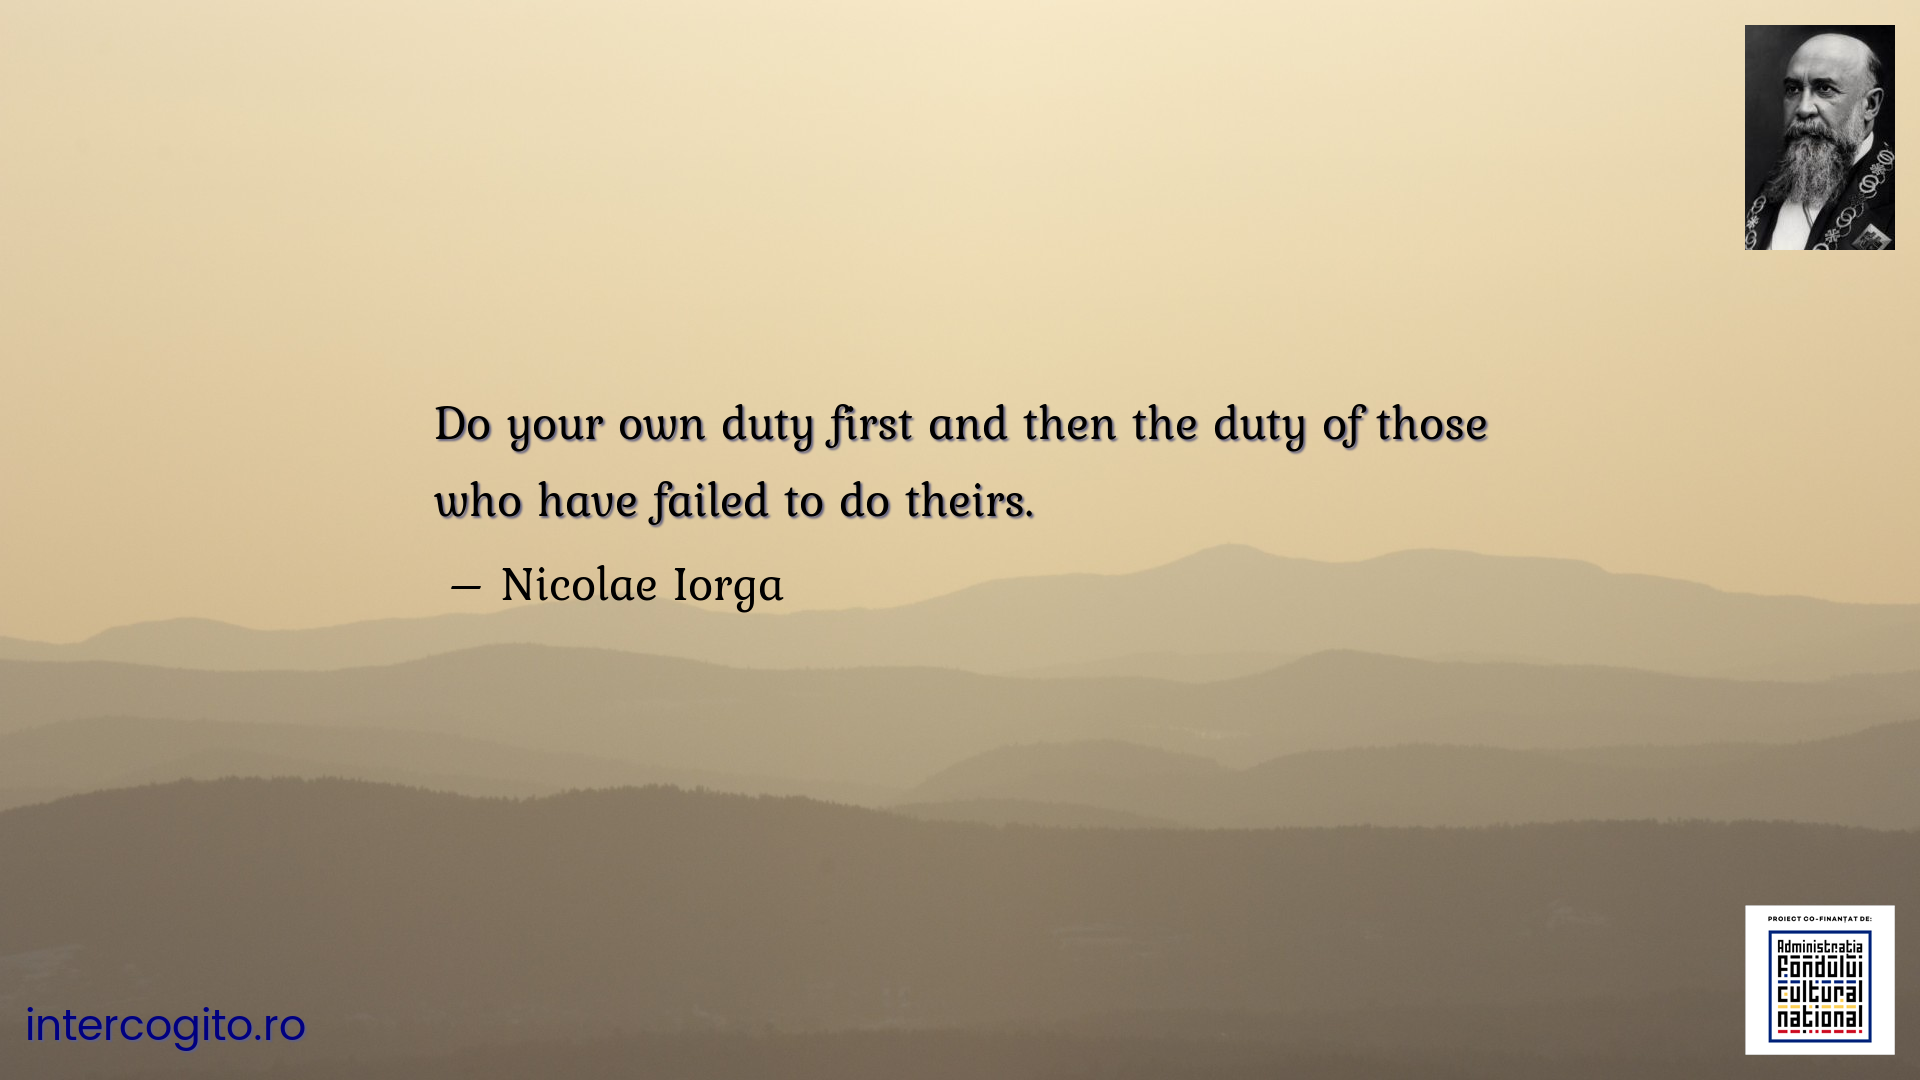 Do your own duty first and then the duty of those who have failed to do theirs.